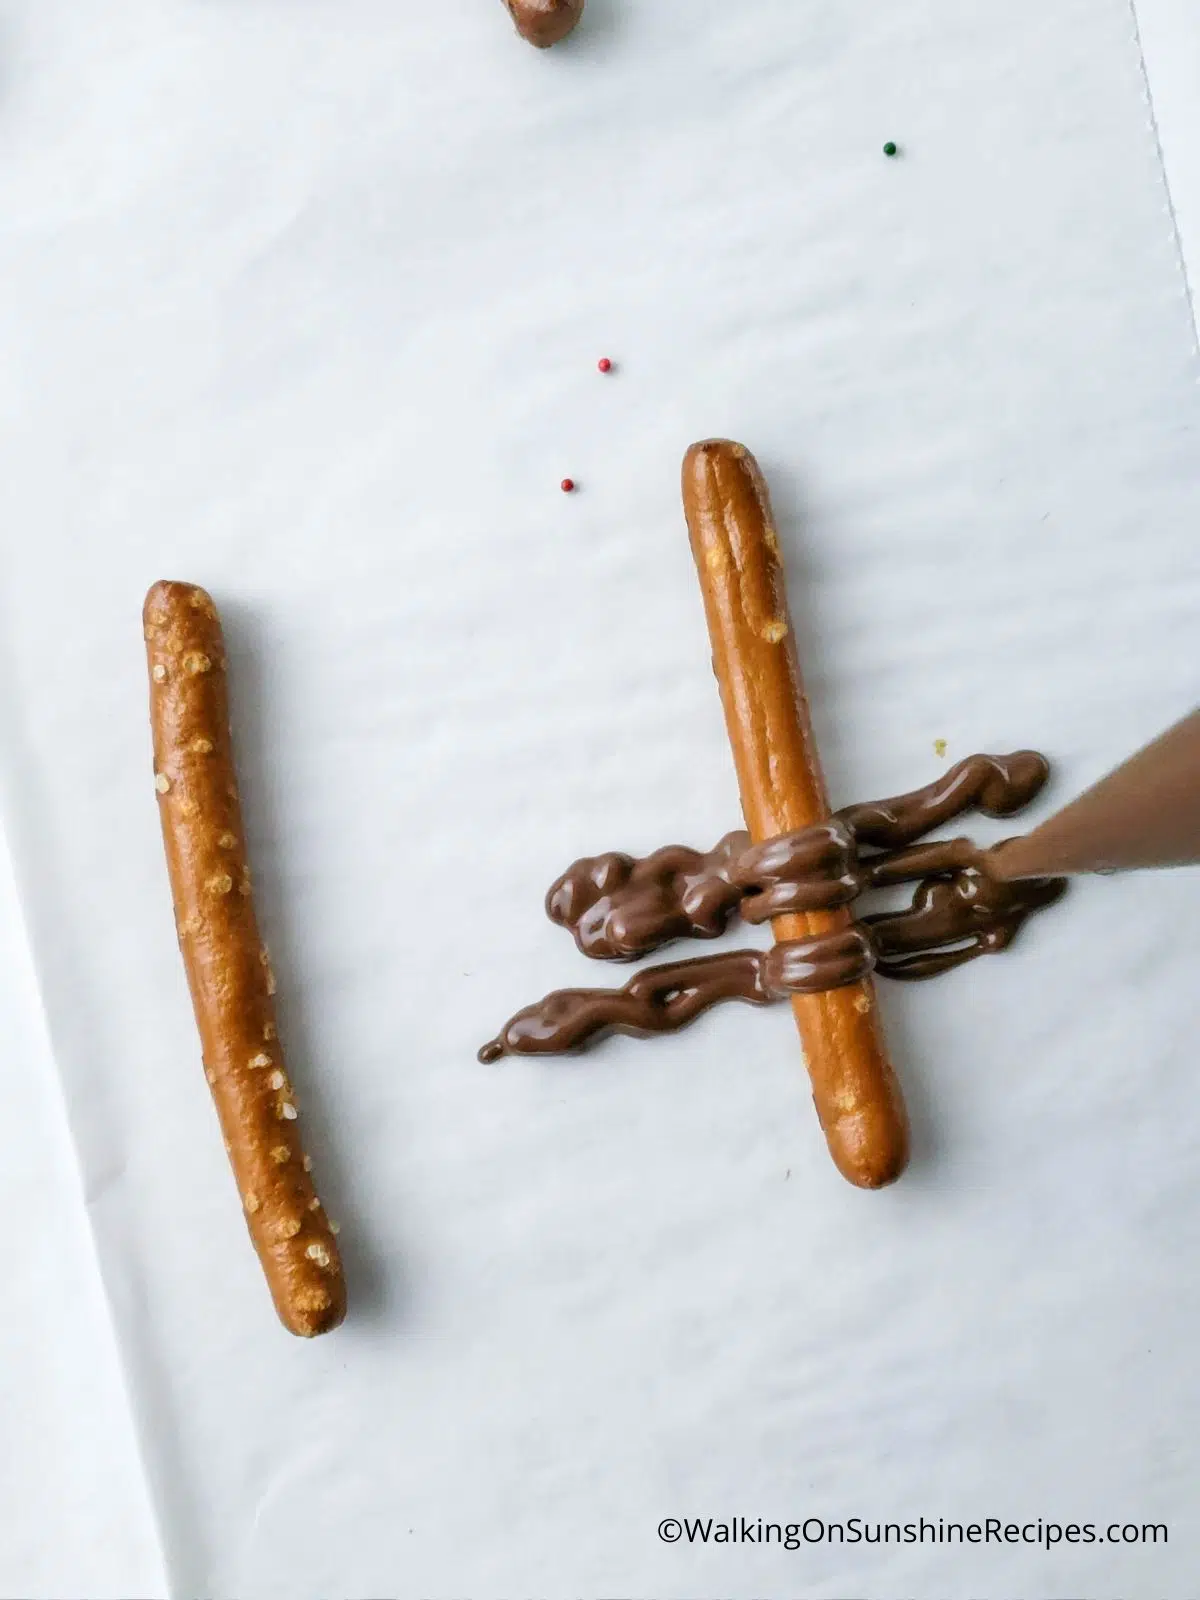 Add melted chocolate to the back of a pretzel stick.